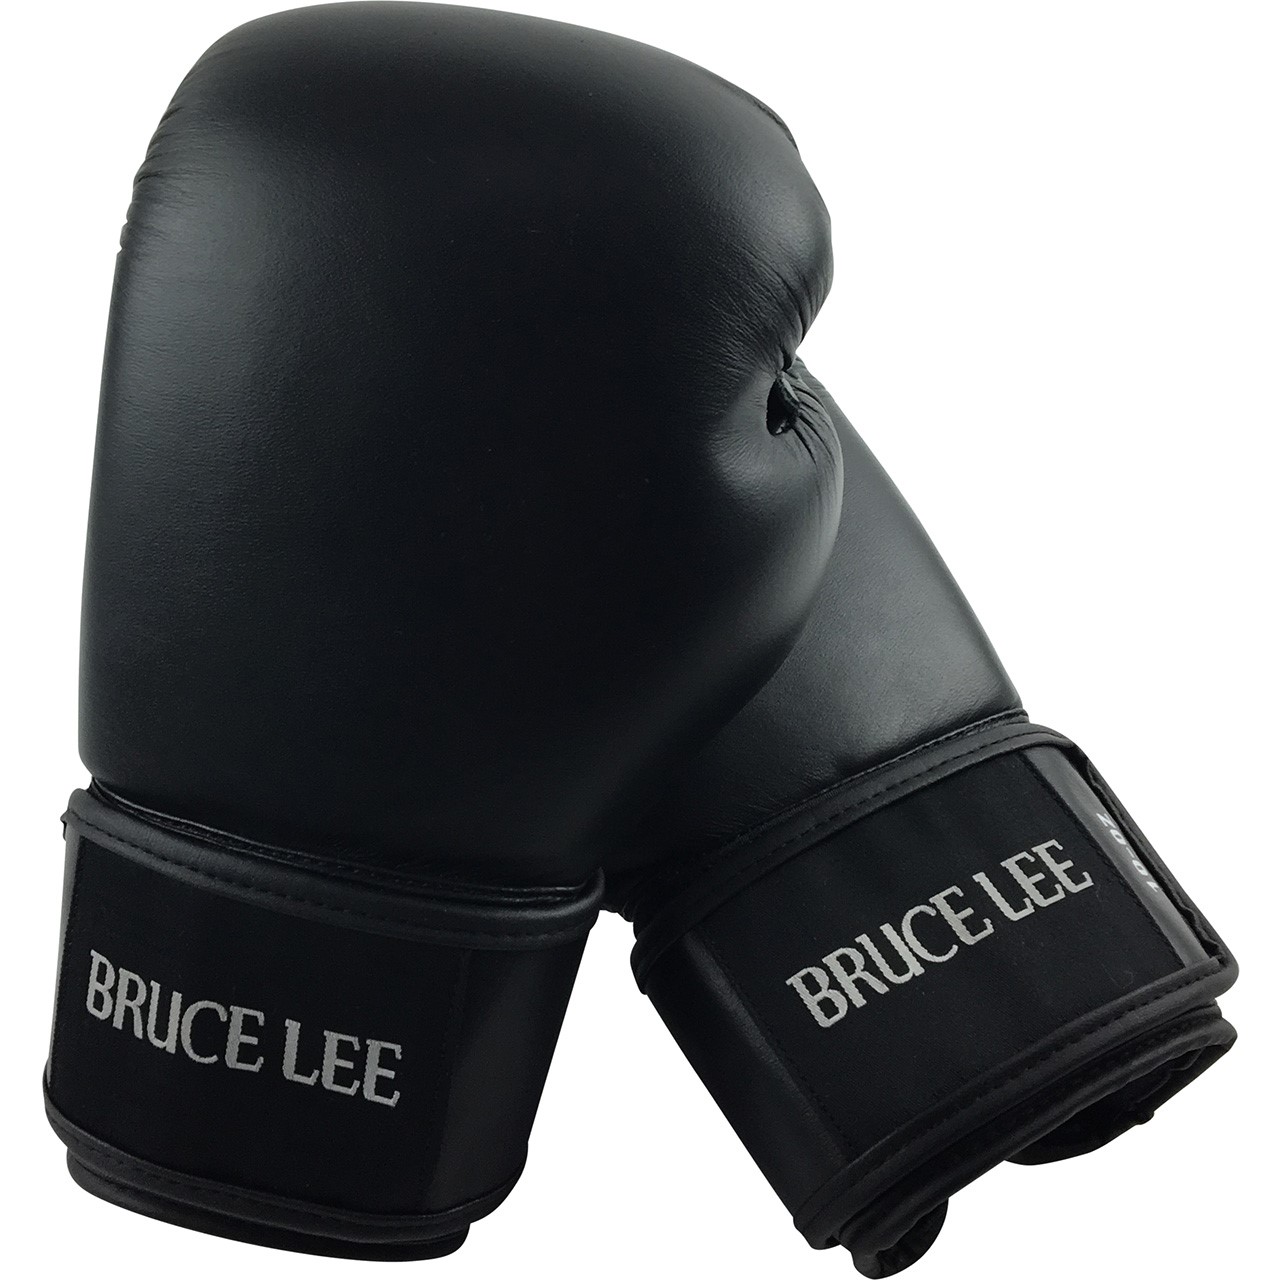 Bruce Lee Allround Boxing Glove Boxhandschuh Pro 